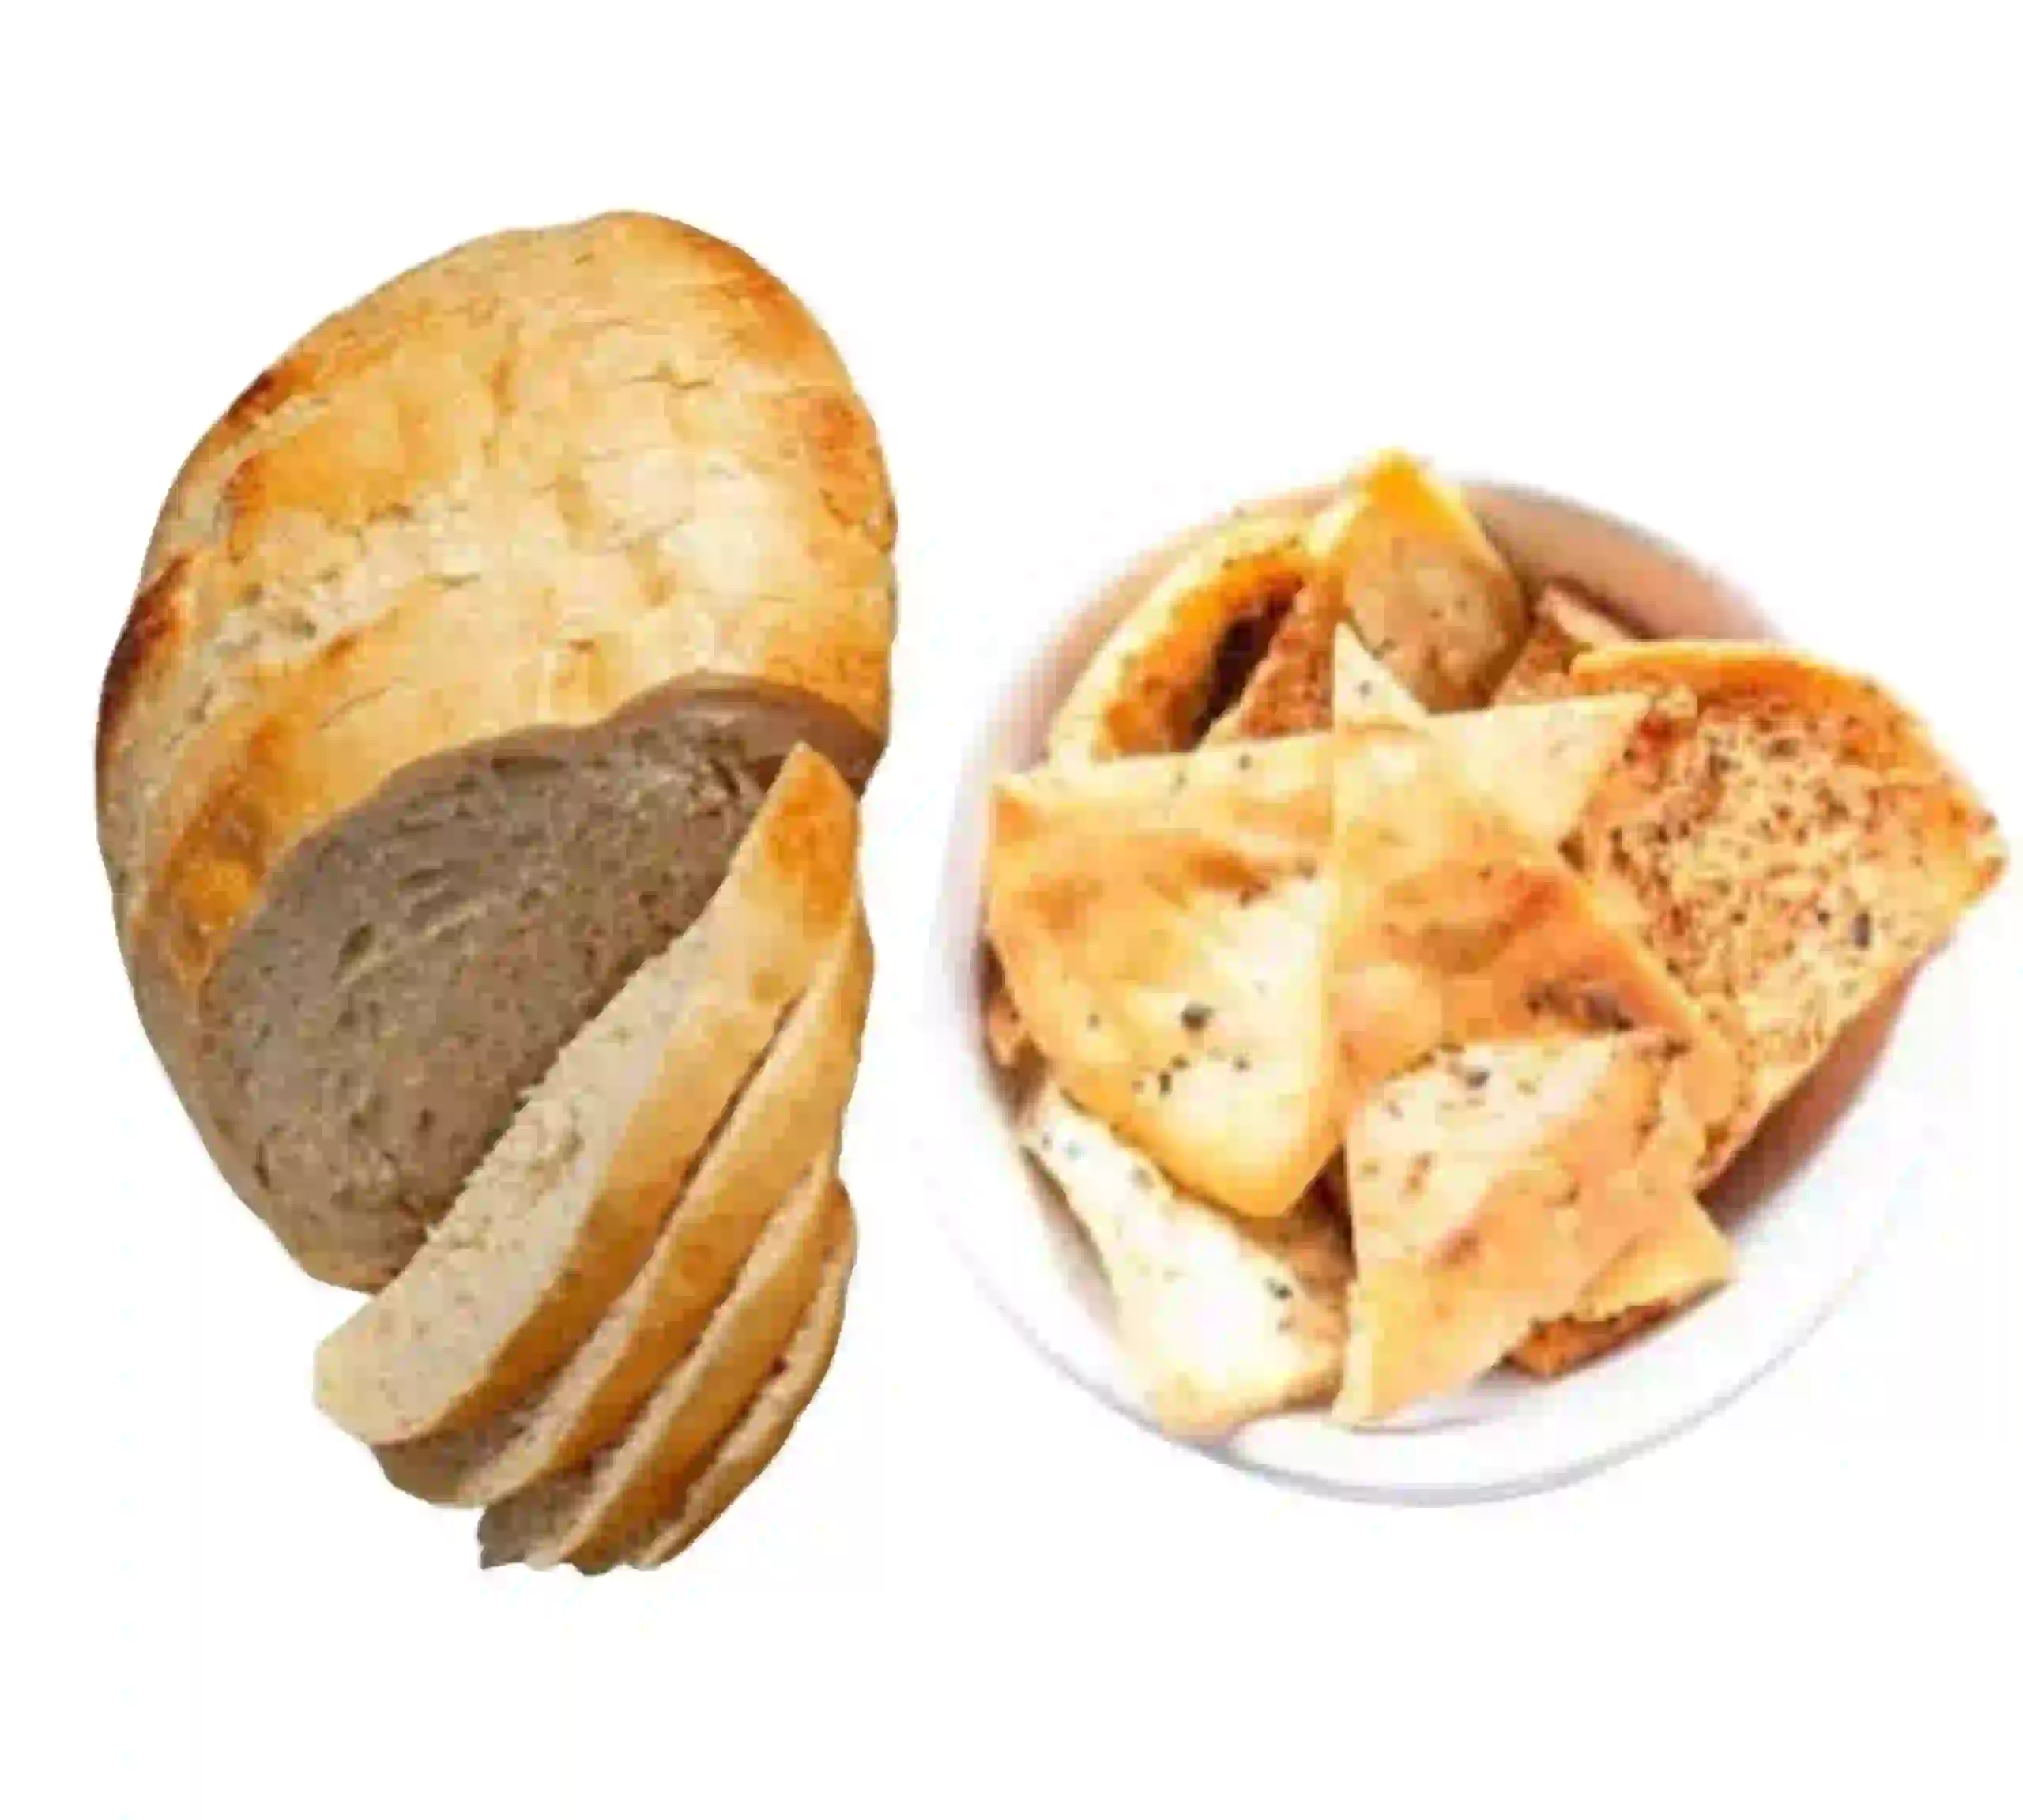 Bread and Snacks